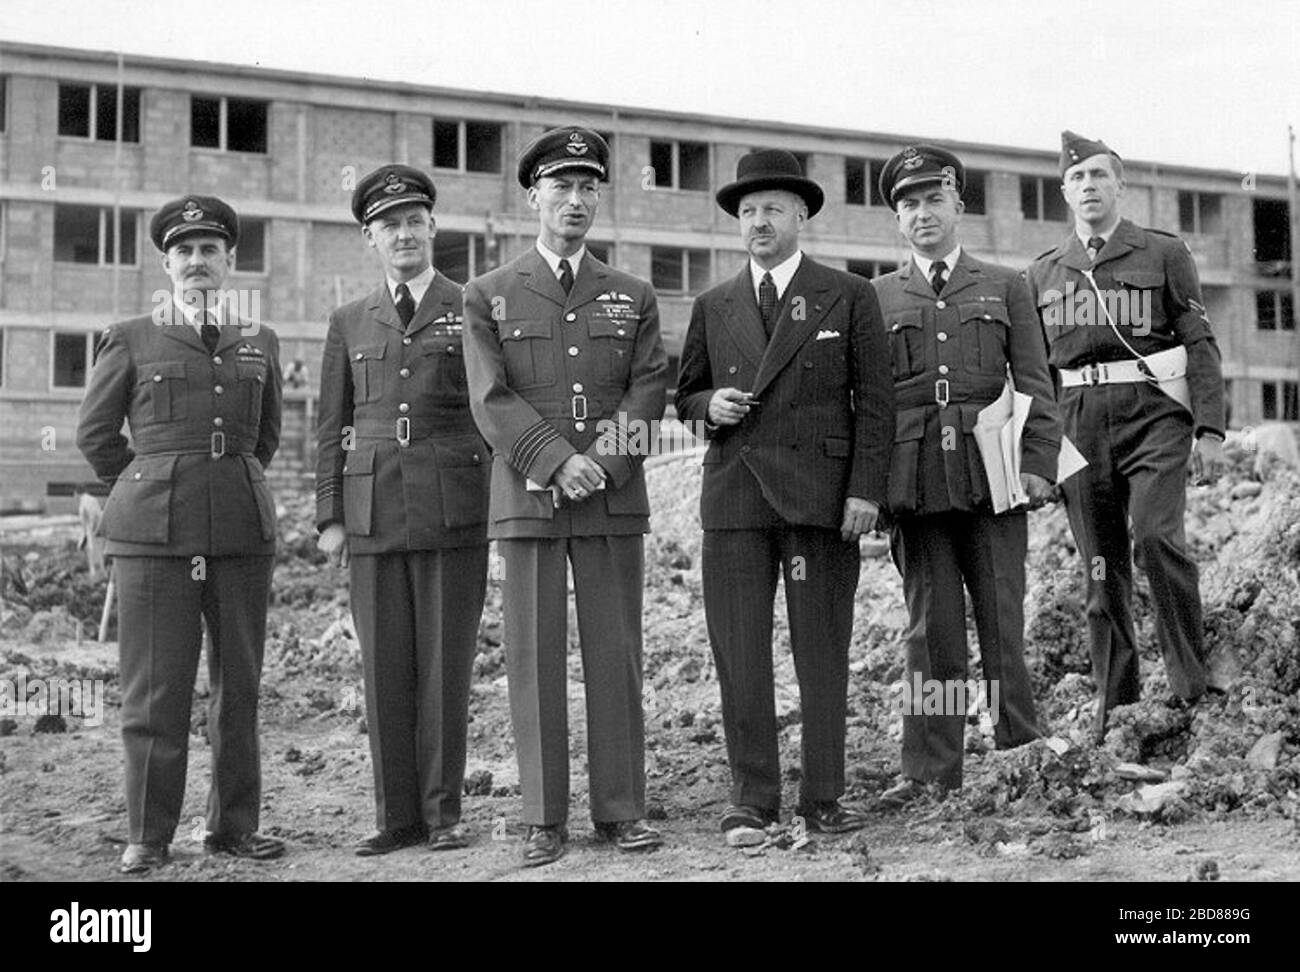 'English: Royal Canadian Air Force permanent married quarters (PMQs) construction inspection by Royal Canadian Air force staff, St. Avold, France, 1954. Air Vice Marshal W.A. Curtis is in civilian suit. These married quarters accommodated dependents of service personnel from RCAF Station Grostenquin, France.; 1954; http://www.c-and-e-museum.org/grostenquin/photos/PMQs/pmqs-1.jpg; Government of Canada; ' Stock Photo